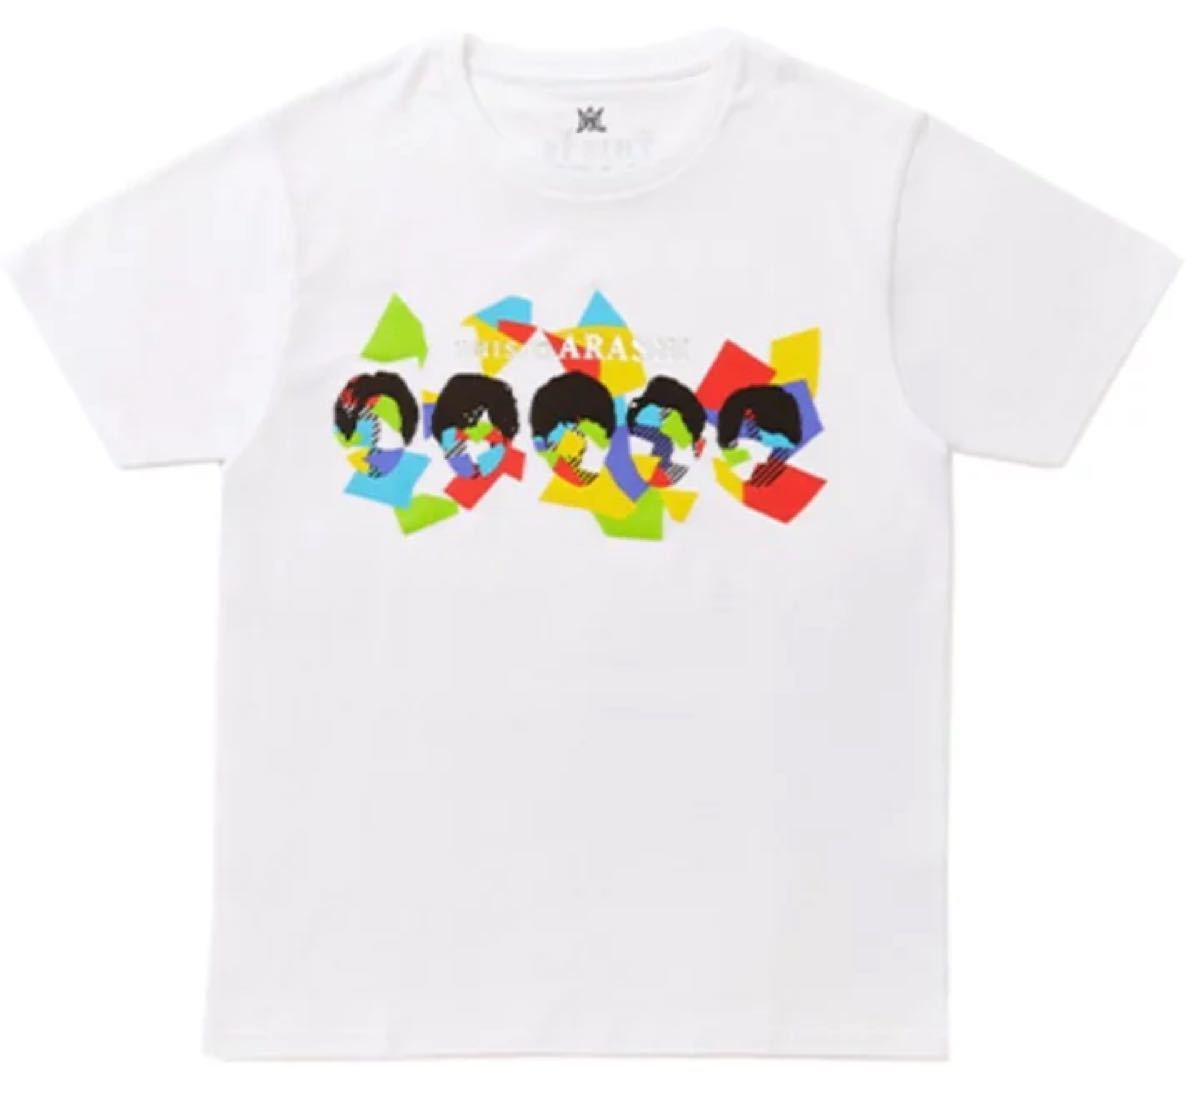 This is 嵐　Tシャツ　白